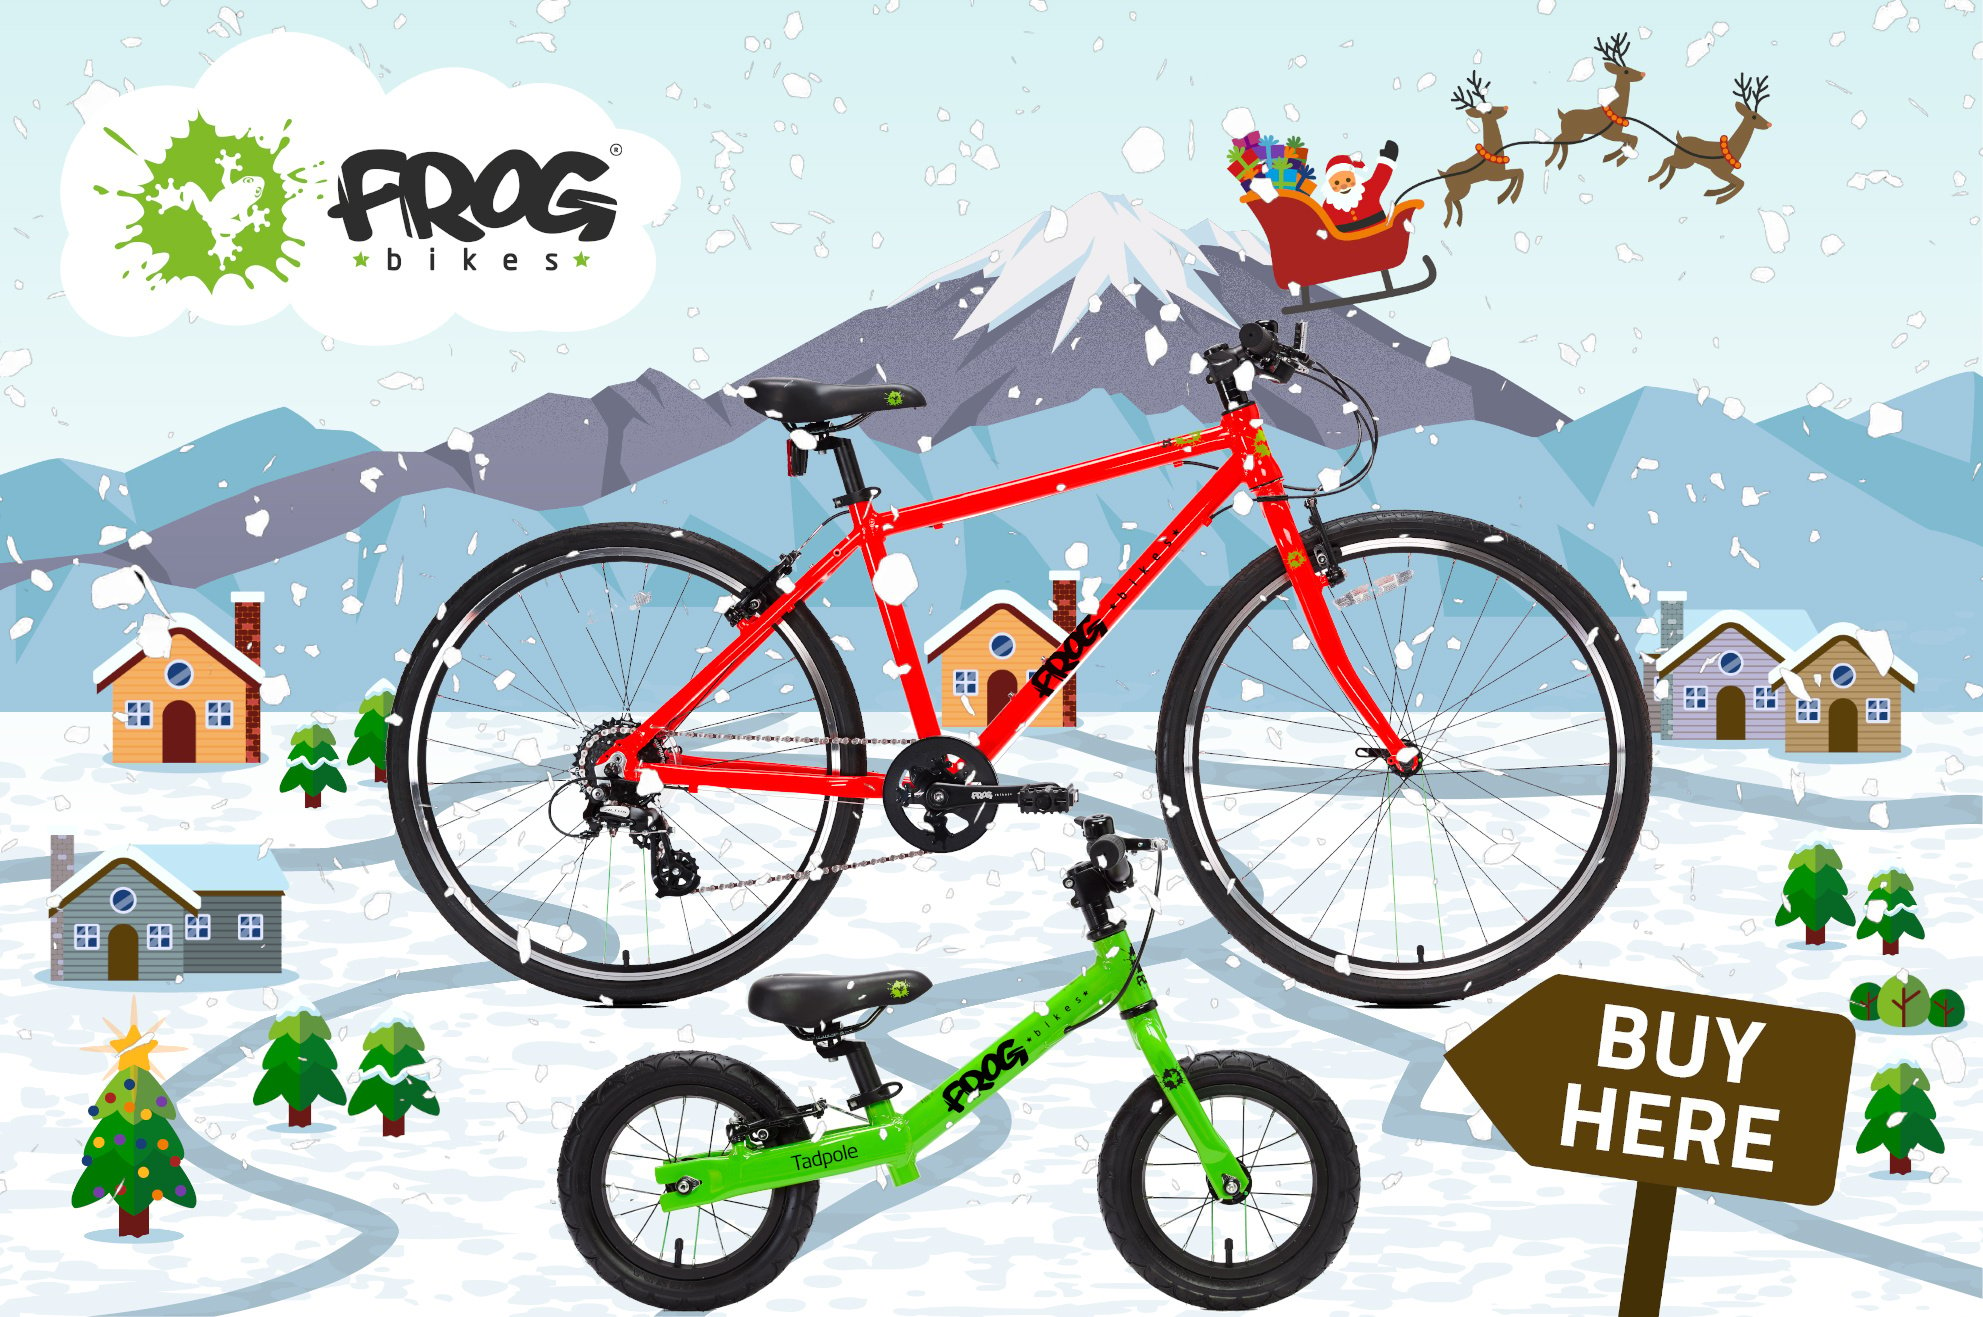 Frog bikes illustrated on a snowy wintery background